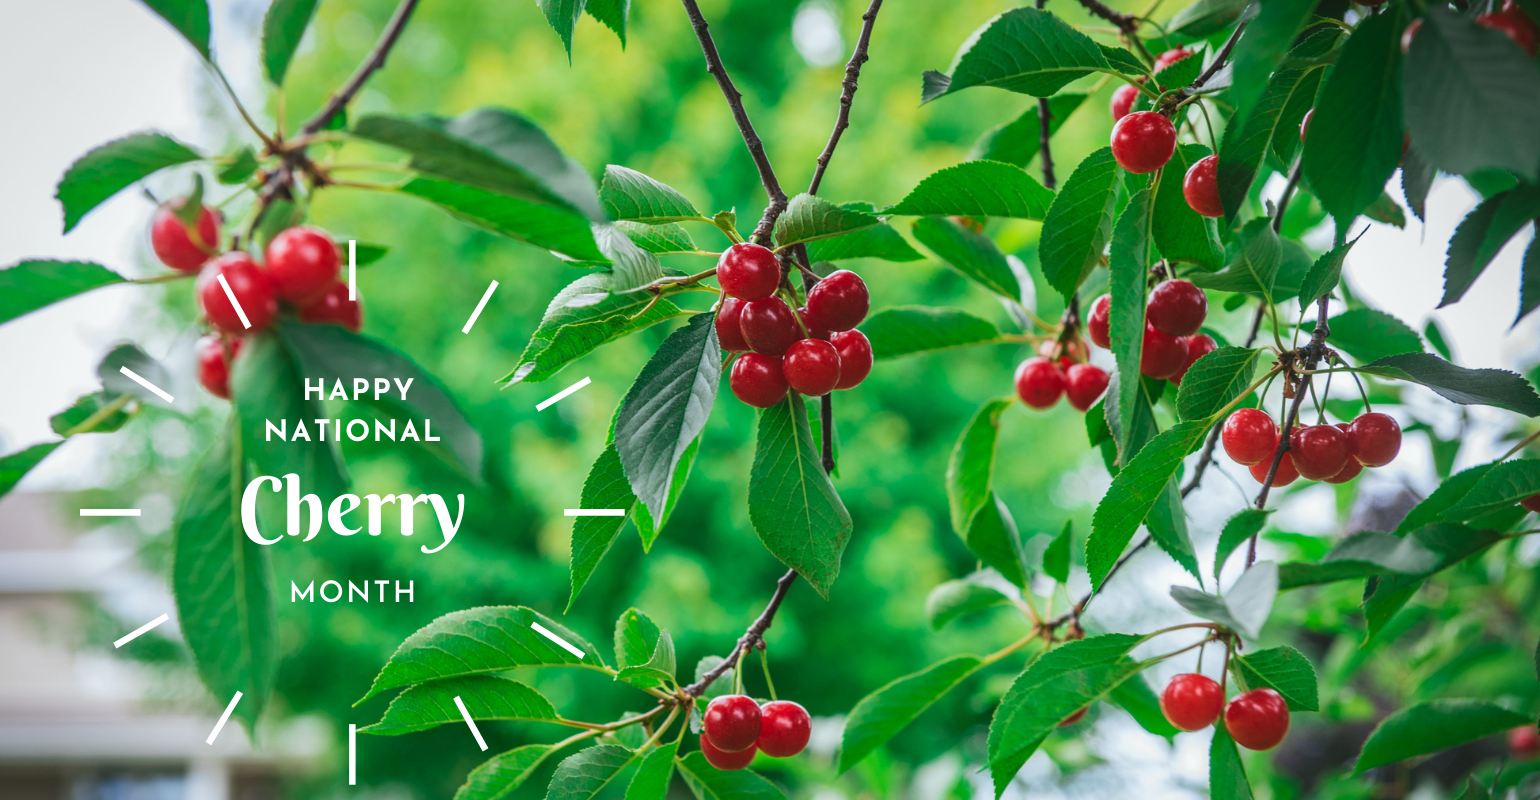 Small clusters of bright red cherries hang from the branches of a cherry tree with a National Cherry Month graphic.